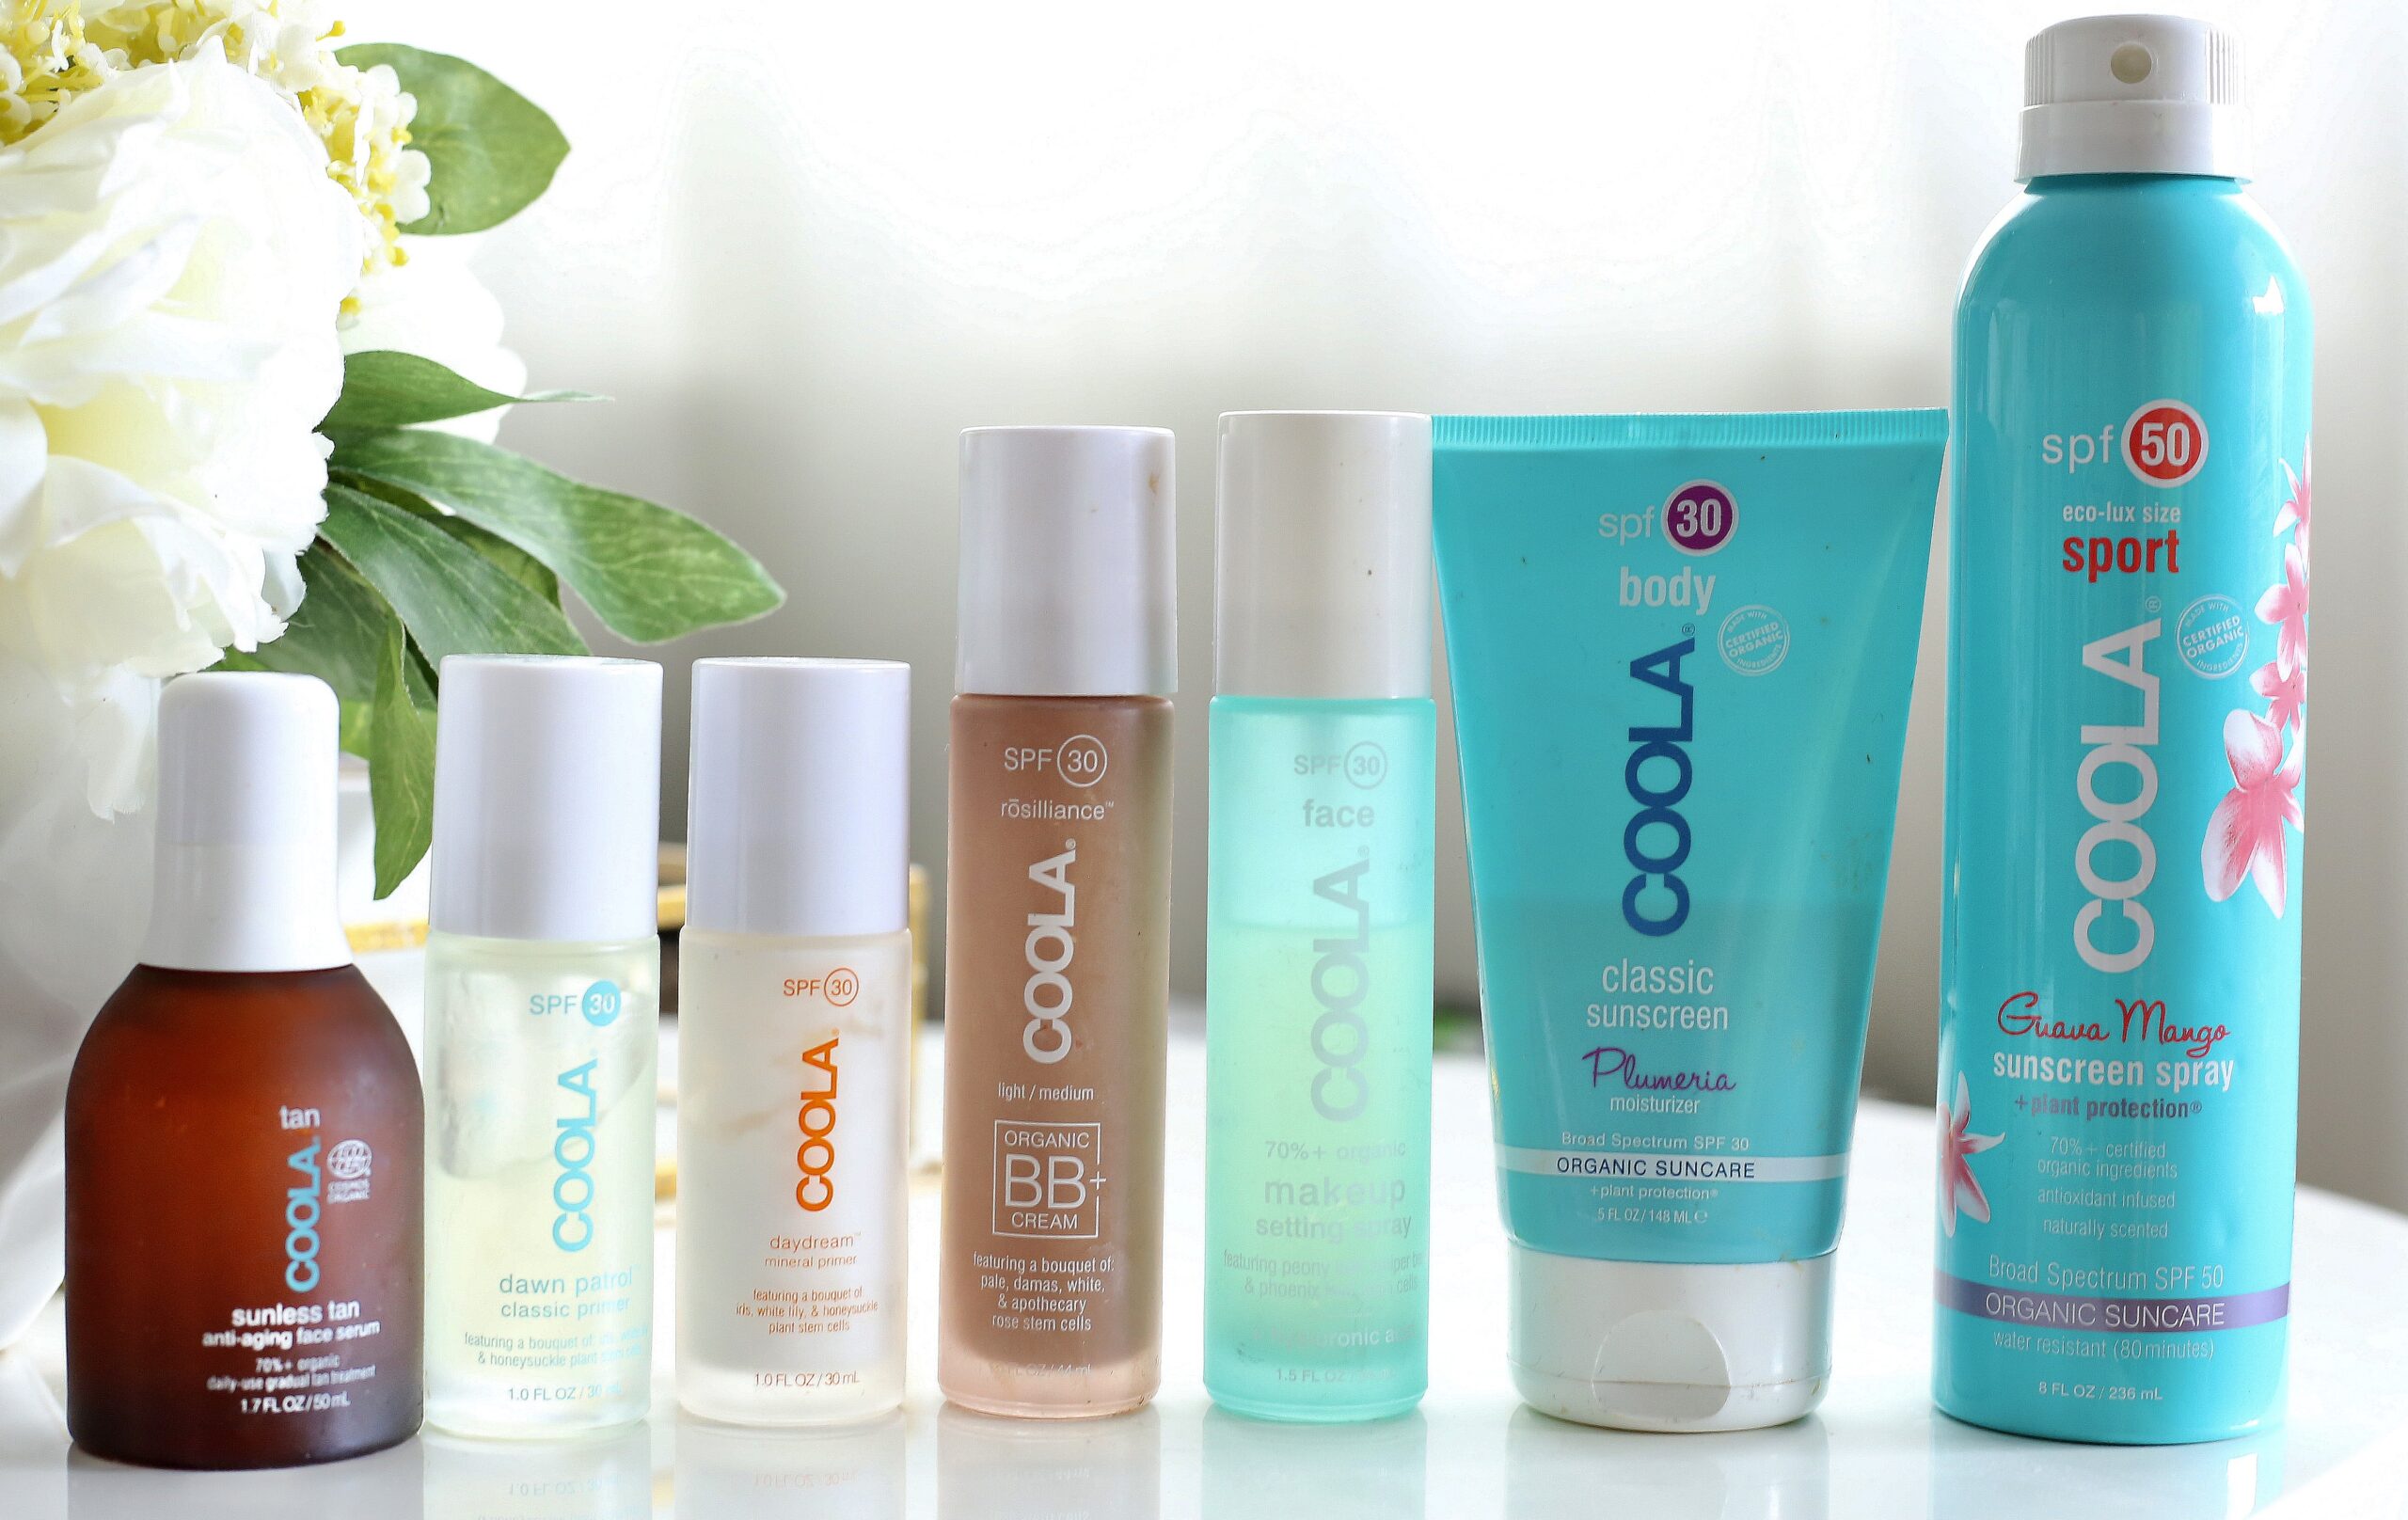 Coola sunscreen review